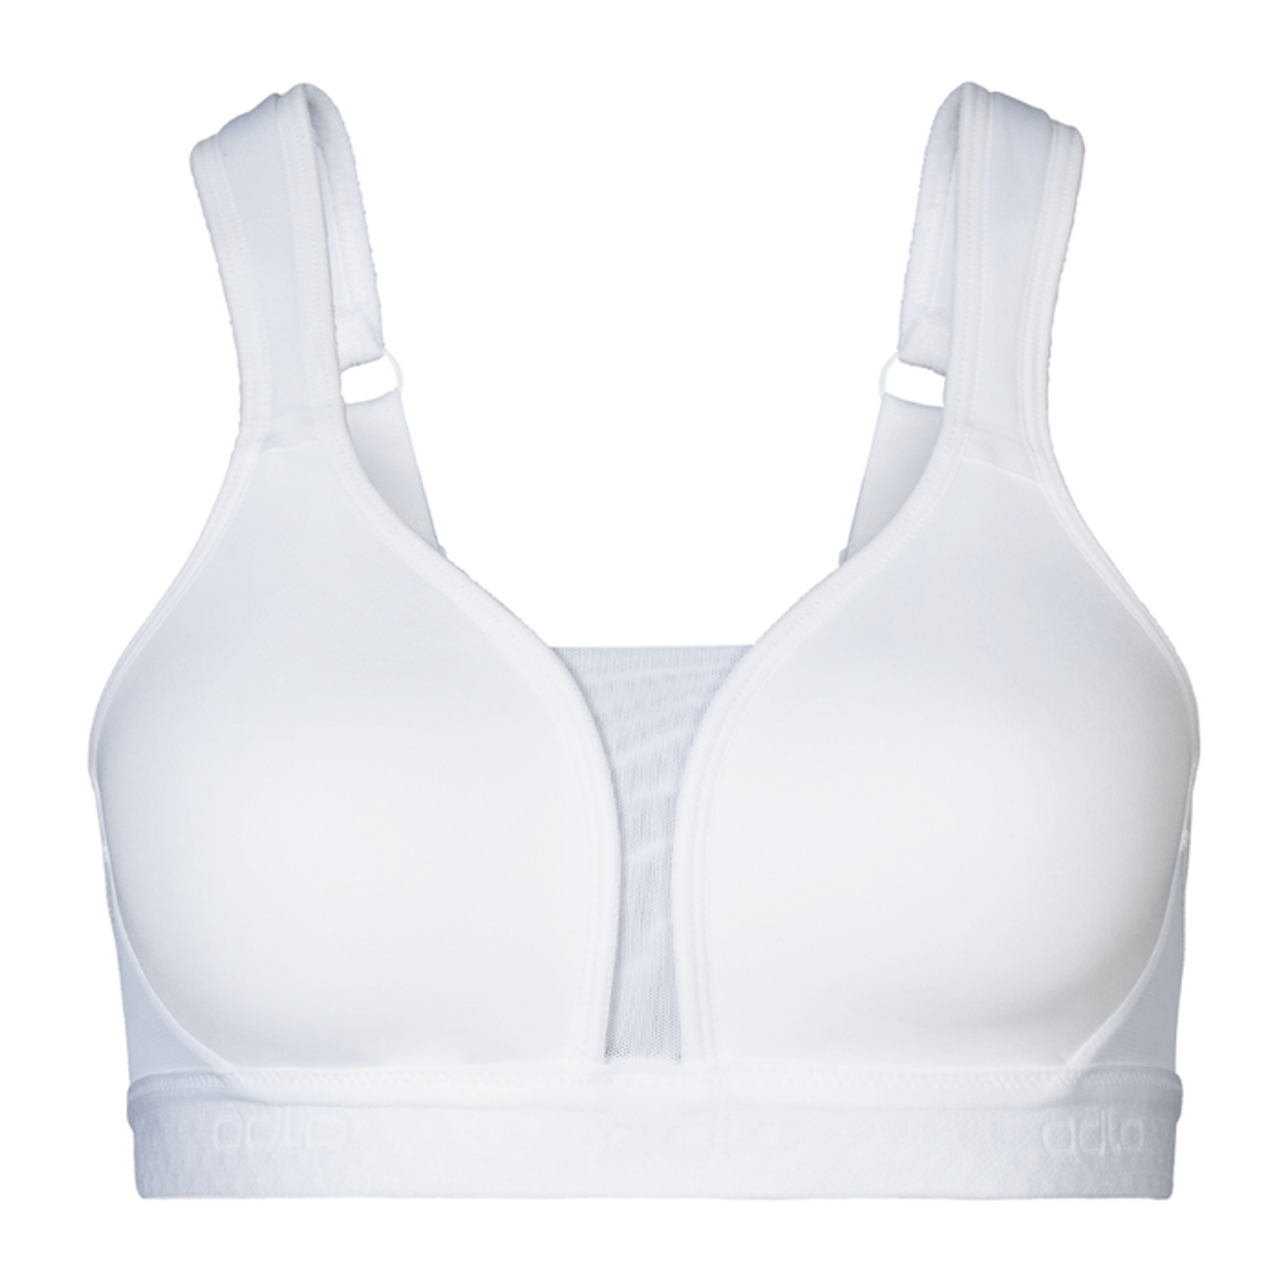 https://cdn11.bigcommerce.com/s-4s8gd94fum/images/stencil/1280w/products/244/1138/odlo-padded-high-sports-bra_1307__74019.1675177906.png